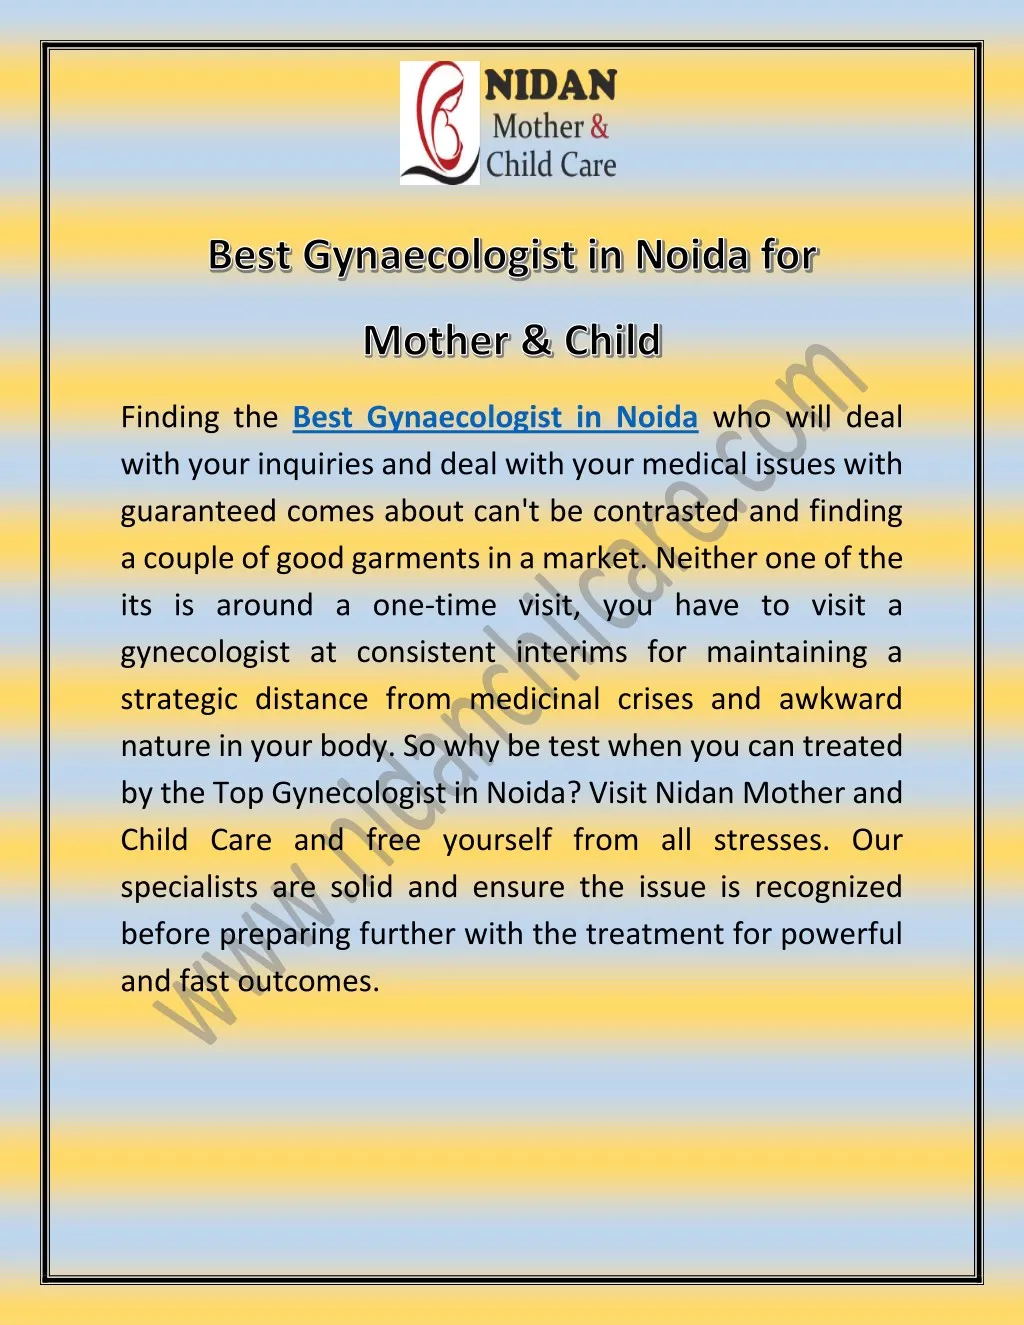 finding the best gynaecologist in noida who will